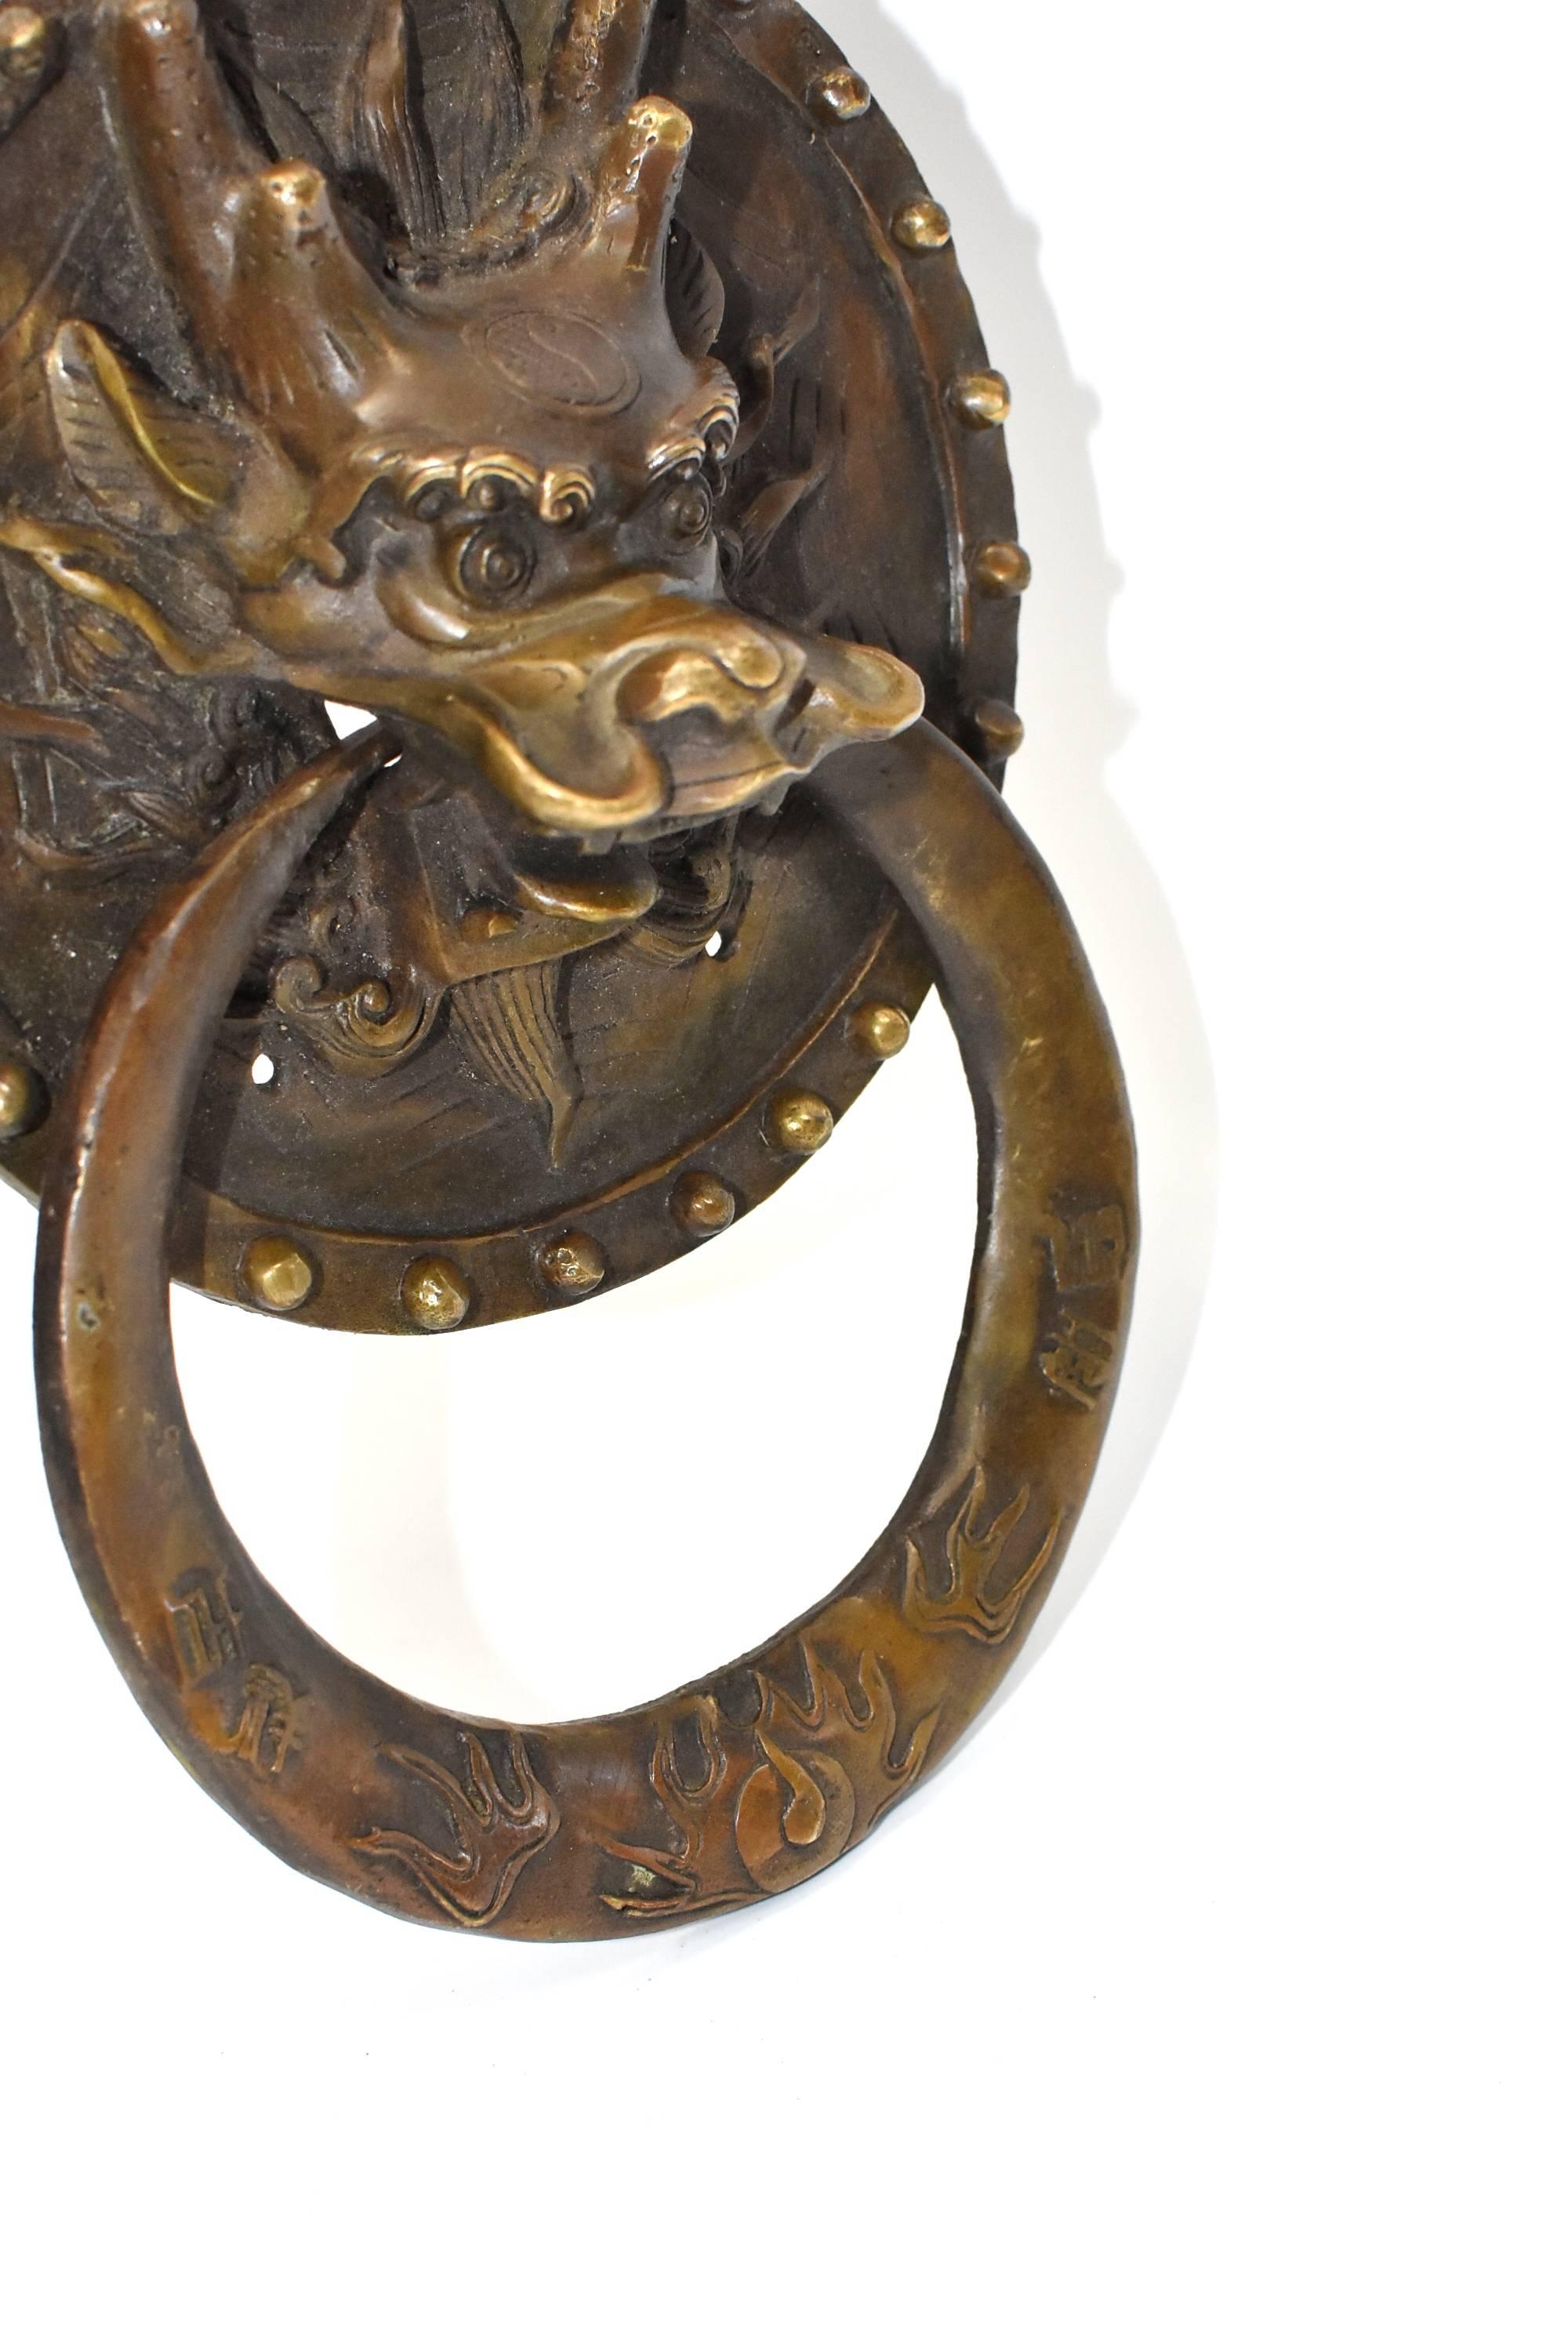 Pair of Brass Door Knockers, Dragon with Round Plates 6